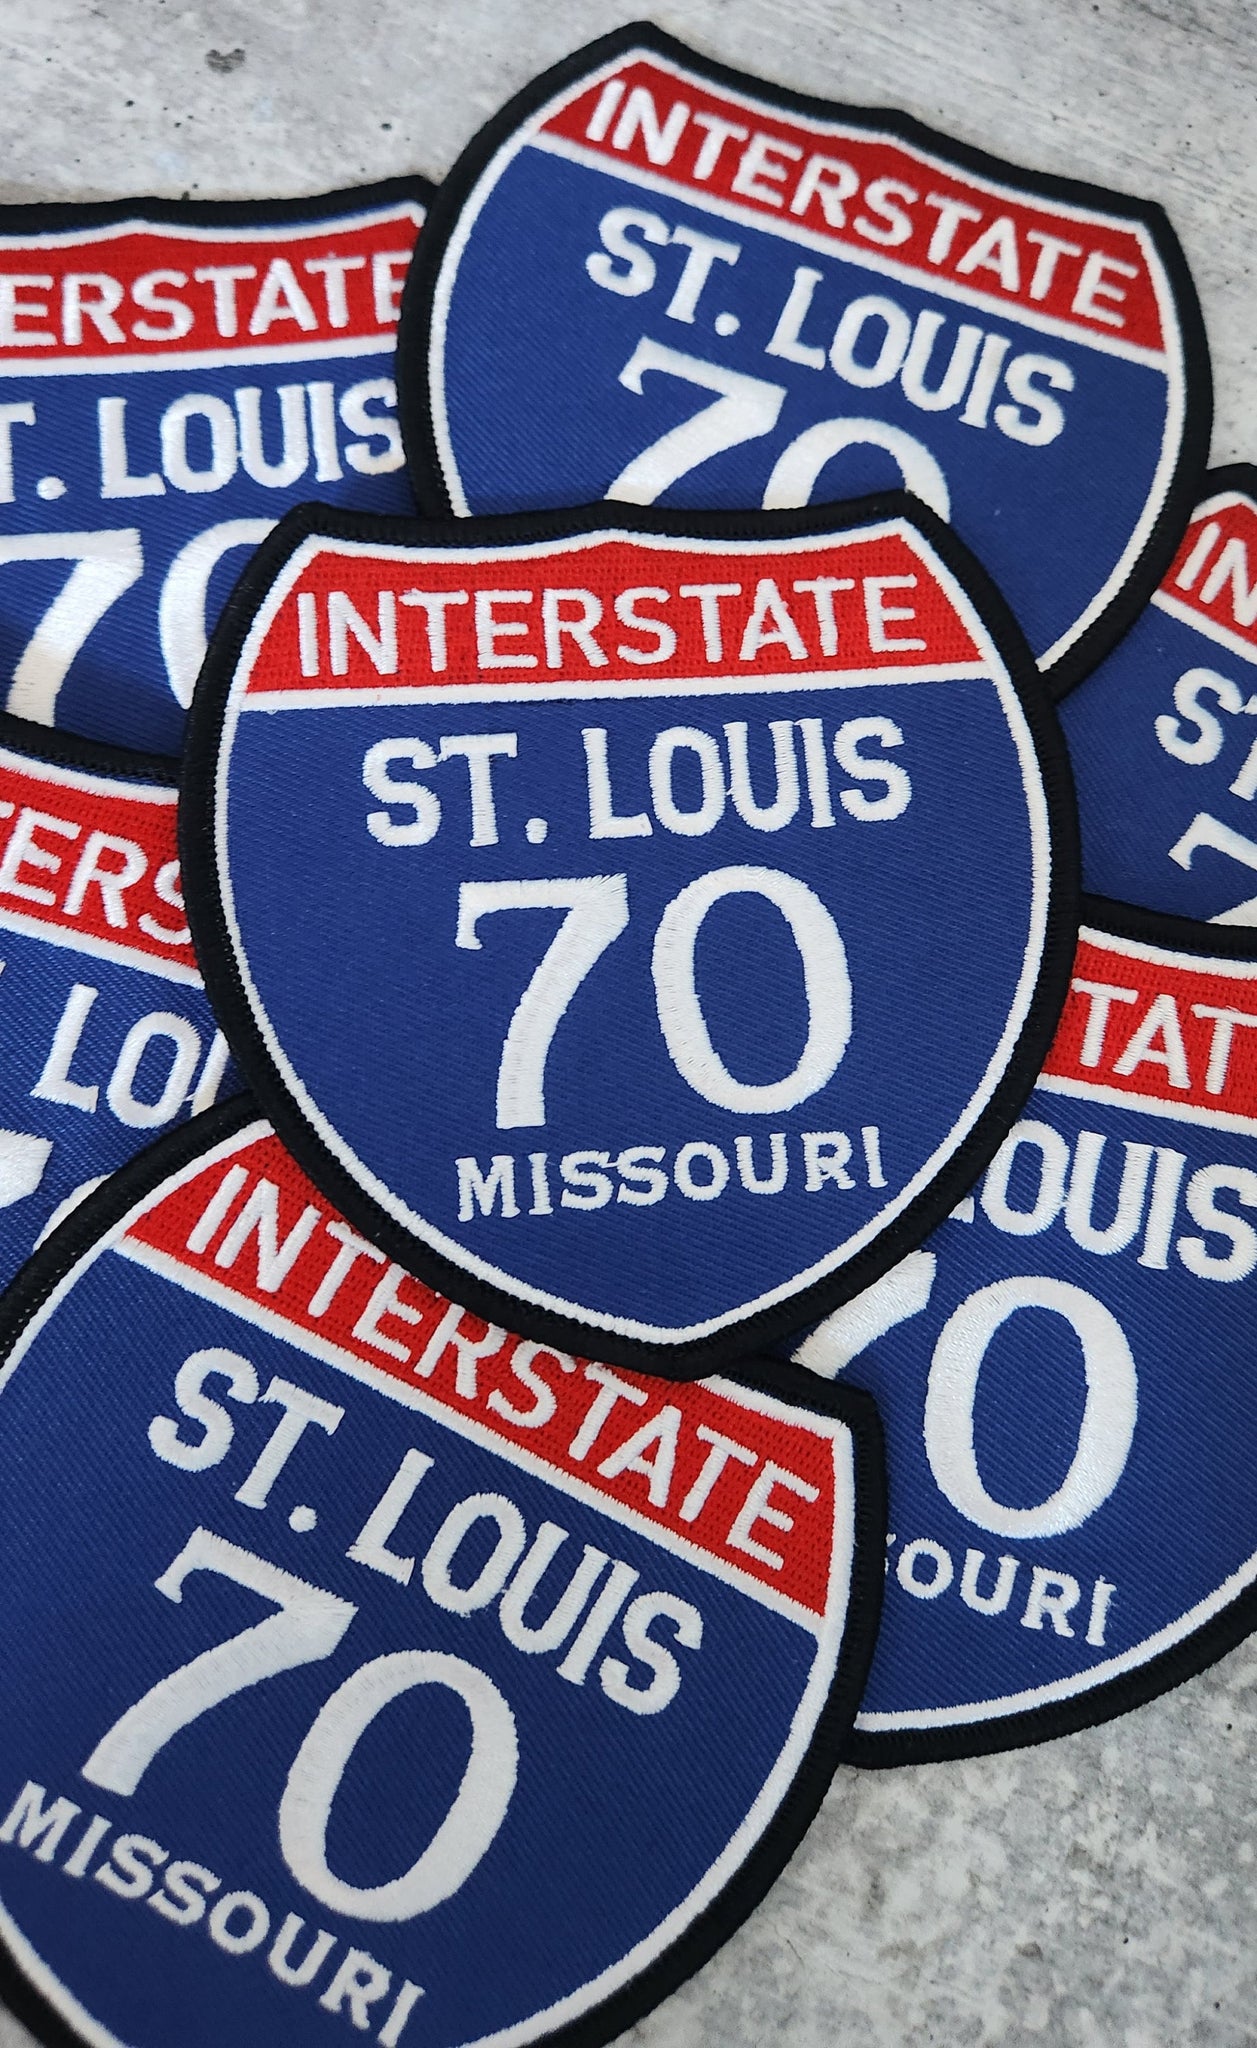 Collectable 1-pc, "ST. LOUIS 4" Interstate 70"  Iron-On Embroidered Patch; Popular Missouri Emblem, Red/White/Blue Badge, Patch for Jackets